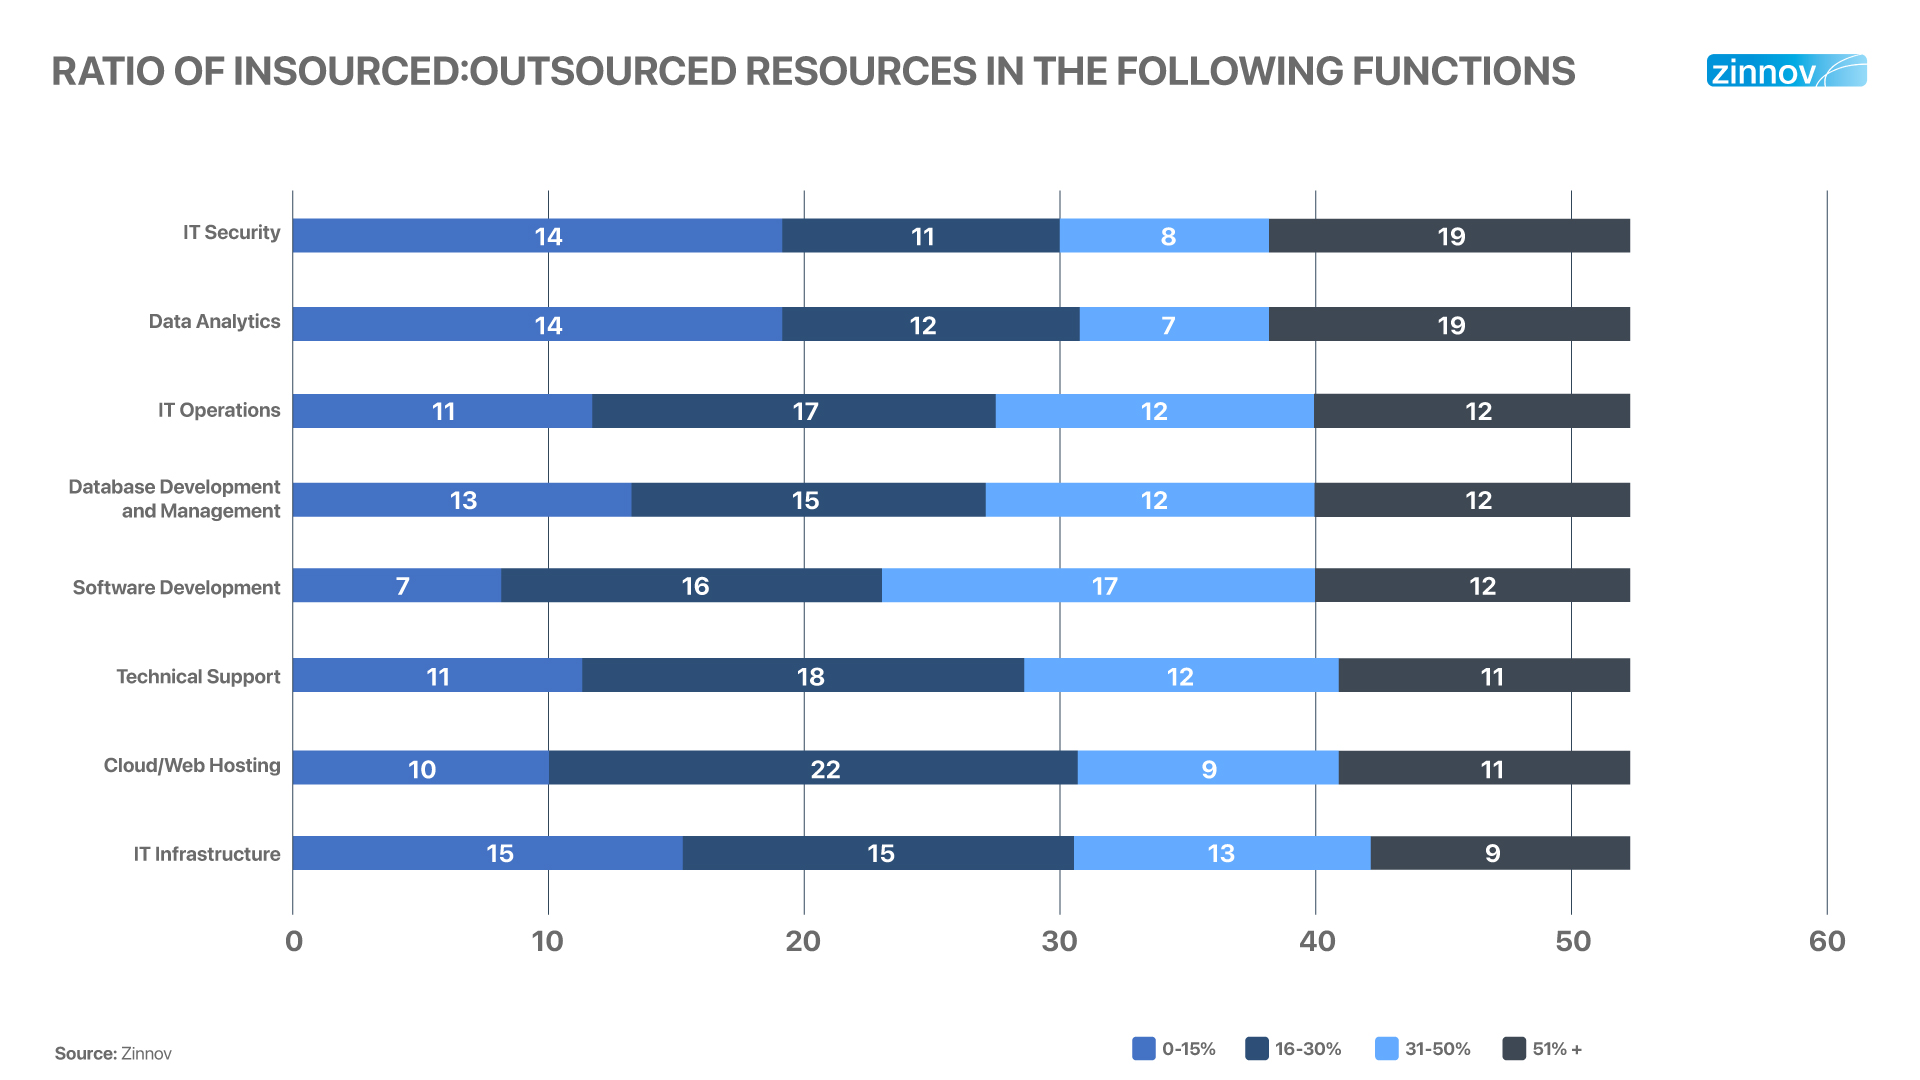 ratio of insourced resources to outsourced resources 

